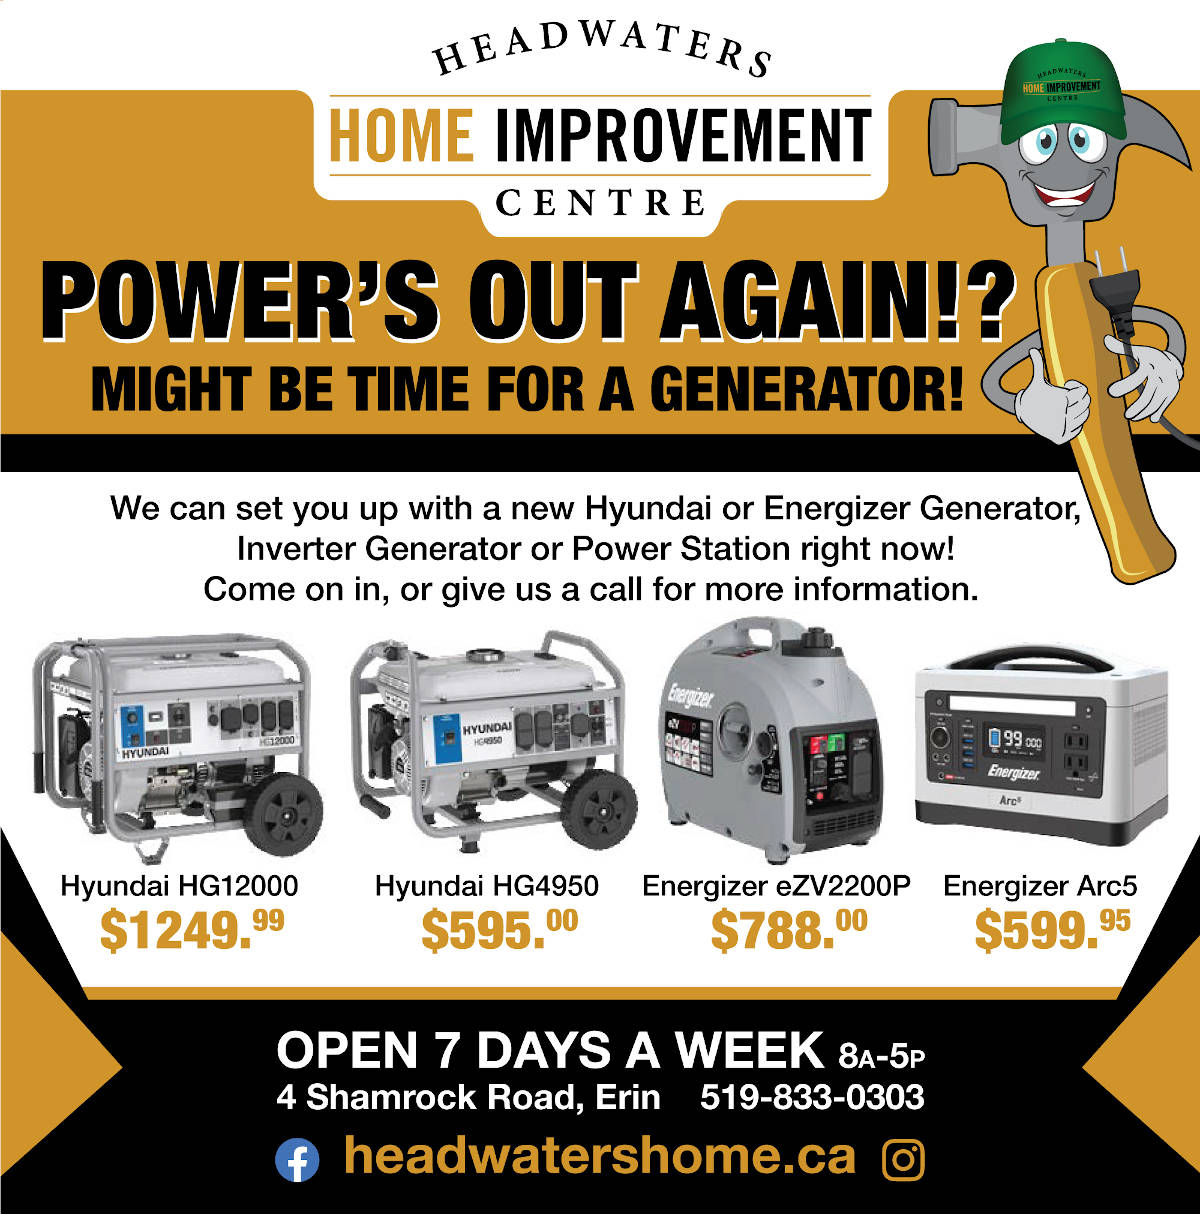 midland power flyer showing generators and pricing